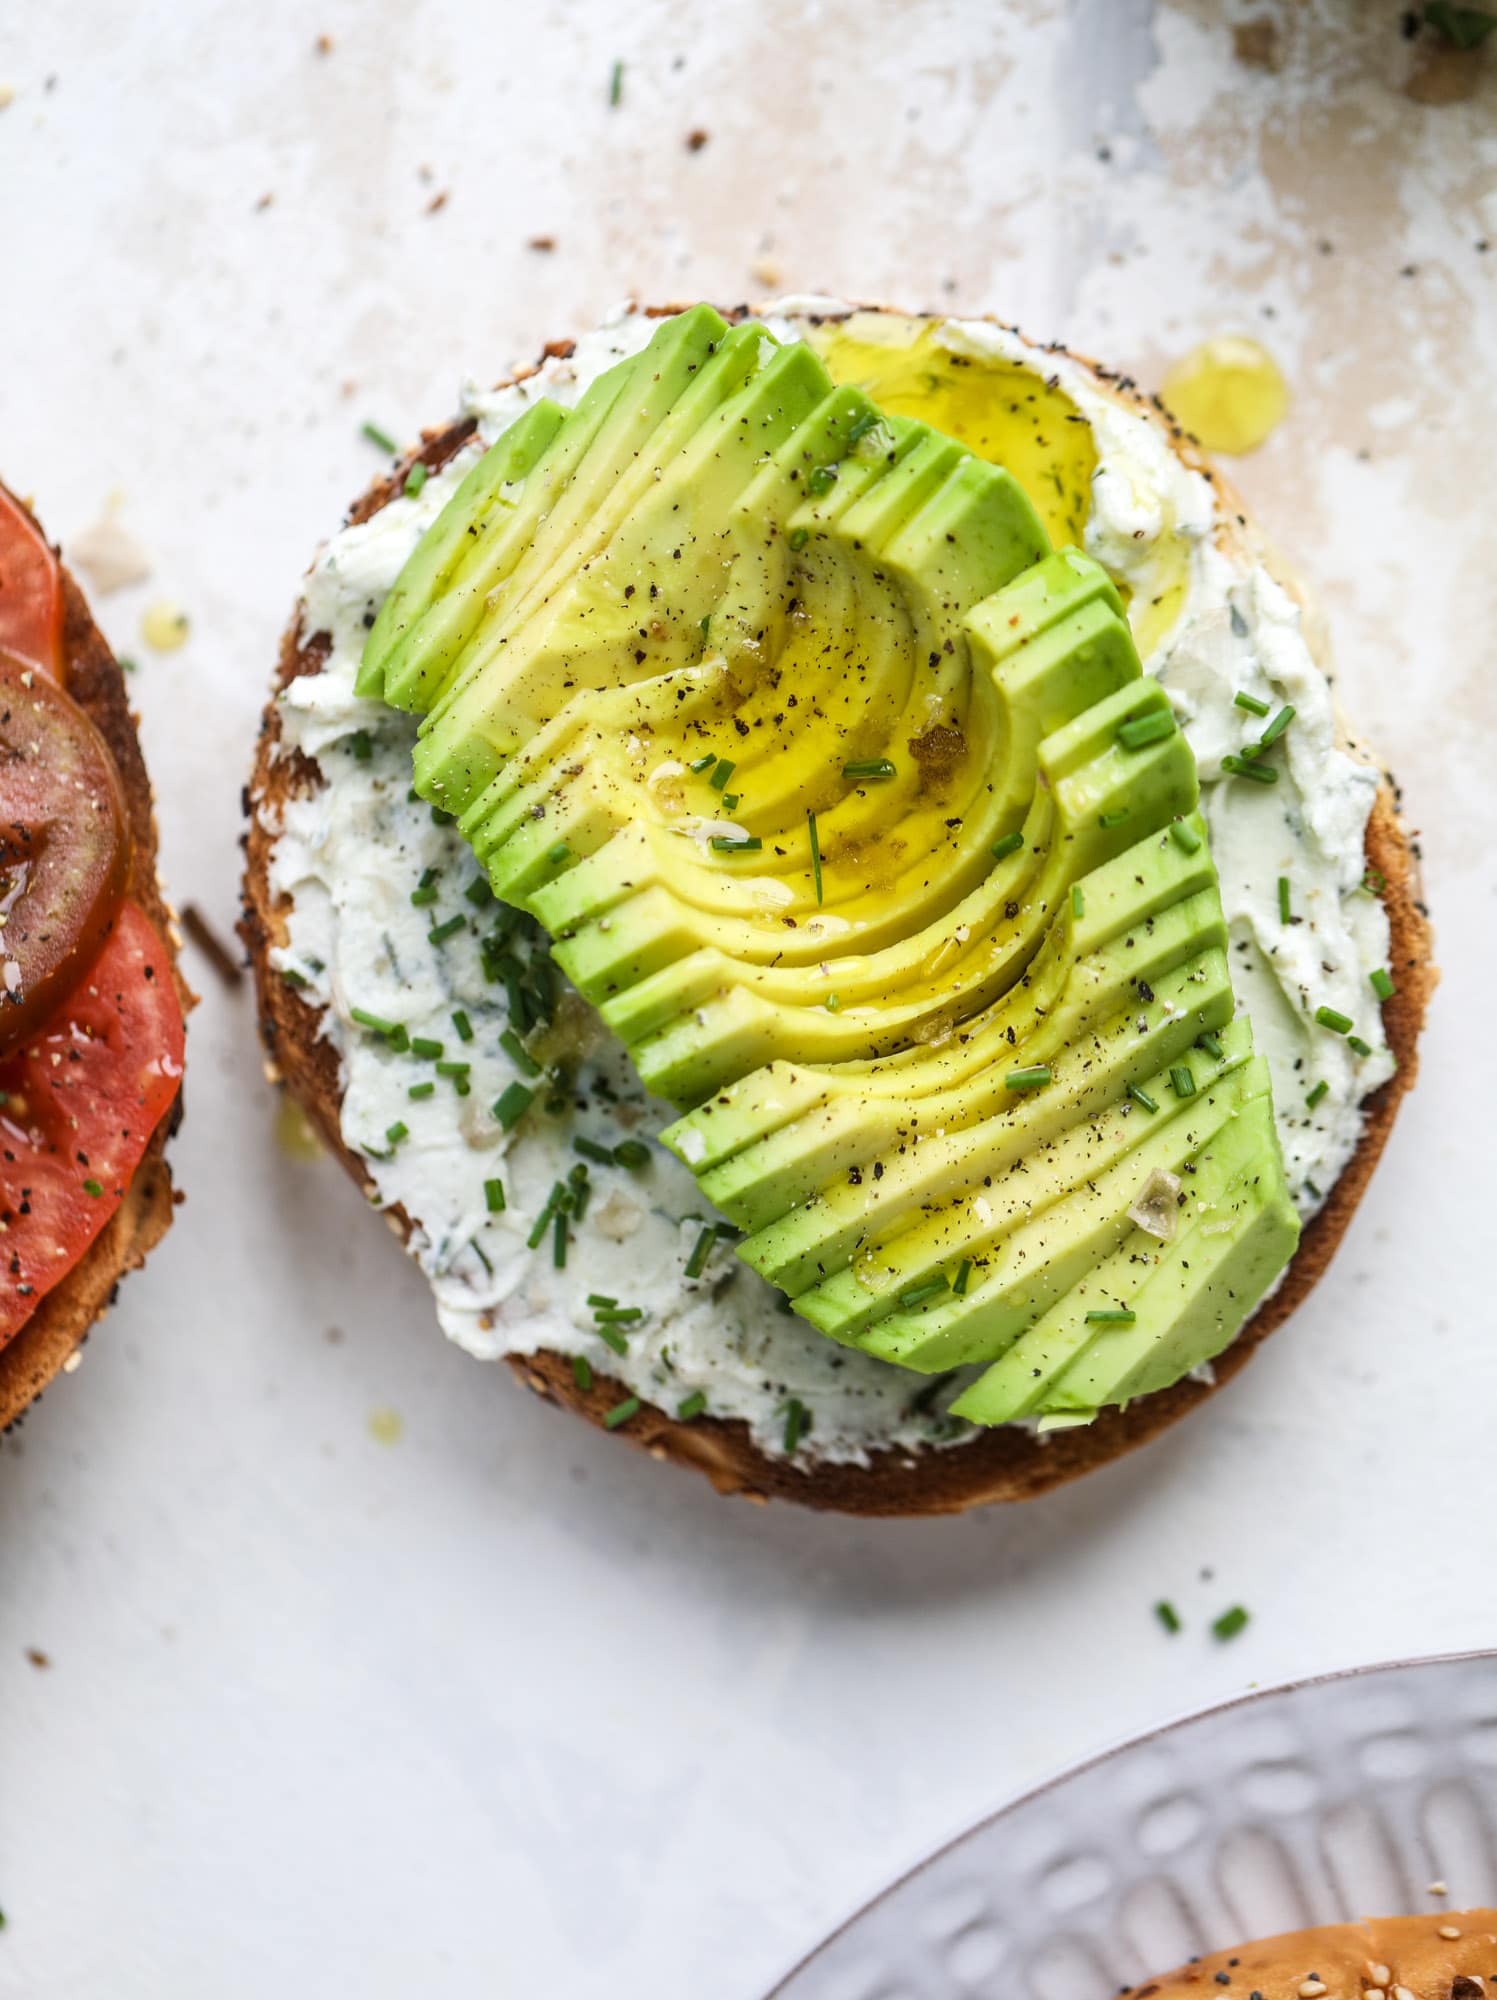 These avocado tomato sandwiches are the perfect lunch! Complete with veggie cream cheese, smoked sea salt, fresh chives and microgreens, the sliced avocado and heirloom tomatoes are sandwiched on an everything bagel for a flavor explosion. I howsweeteats.com #avocado #tomato #sandwich #healthy #lunch